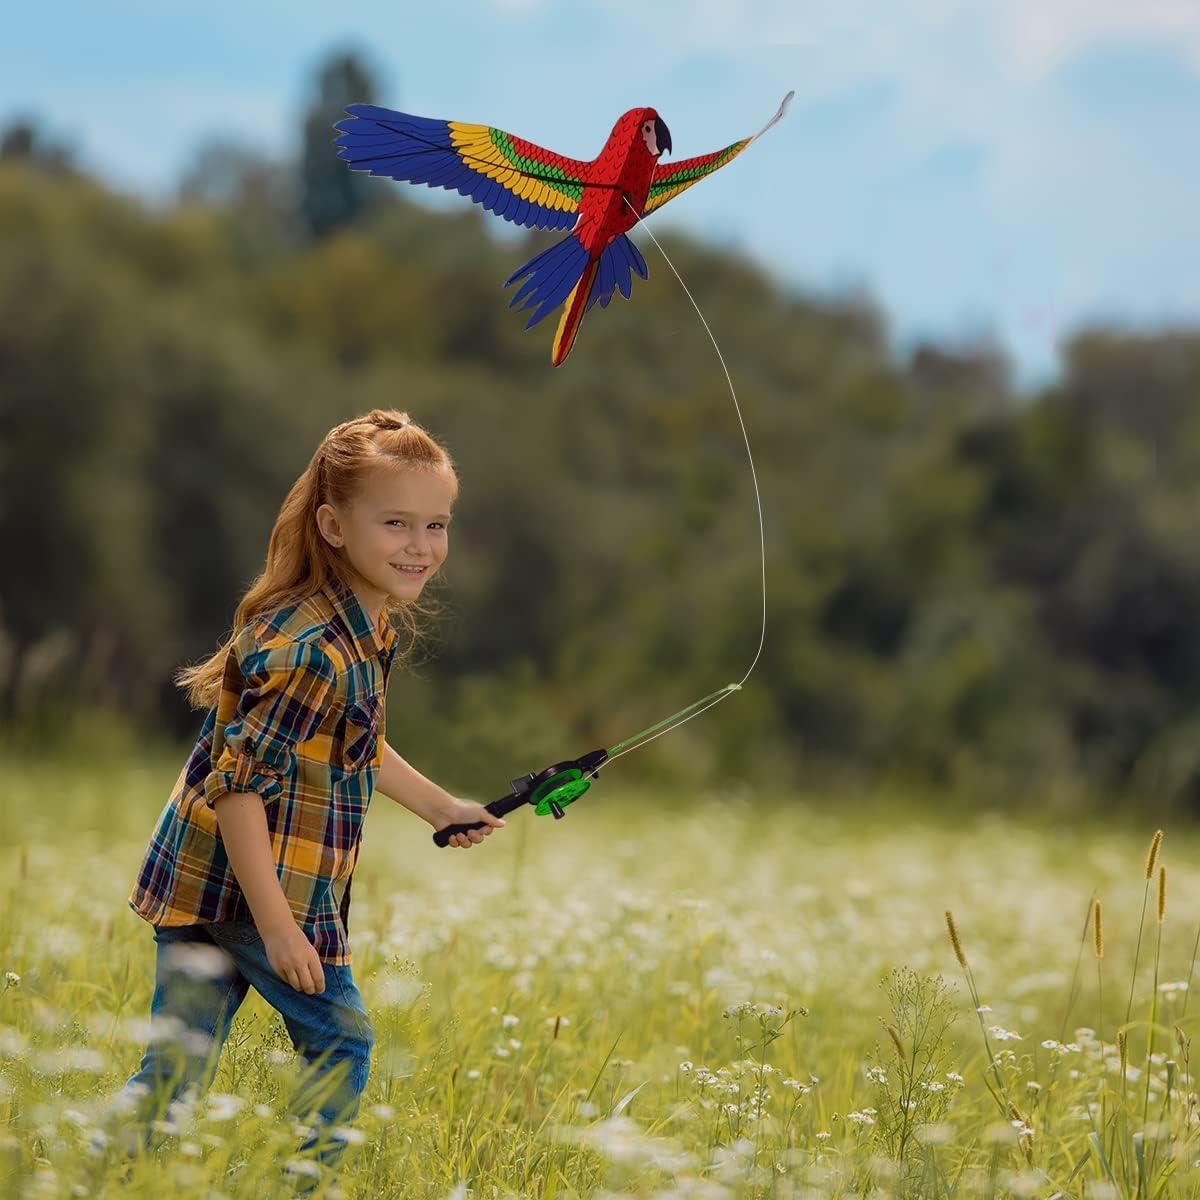 Gold Fish Mini Kite For Kids Ages 3-8, Kites For Toddlers Age 3-5